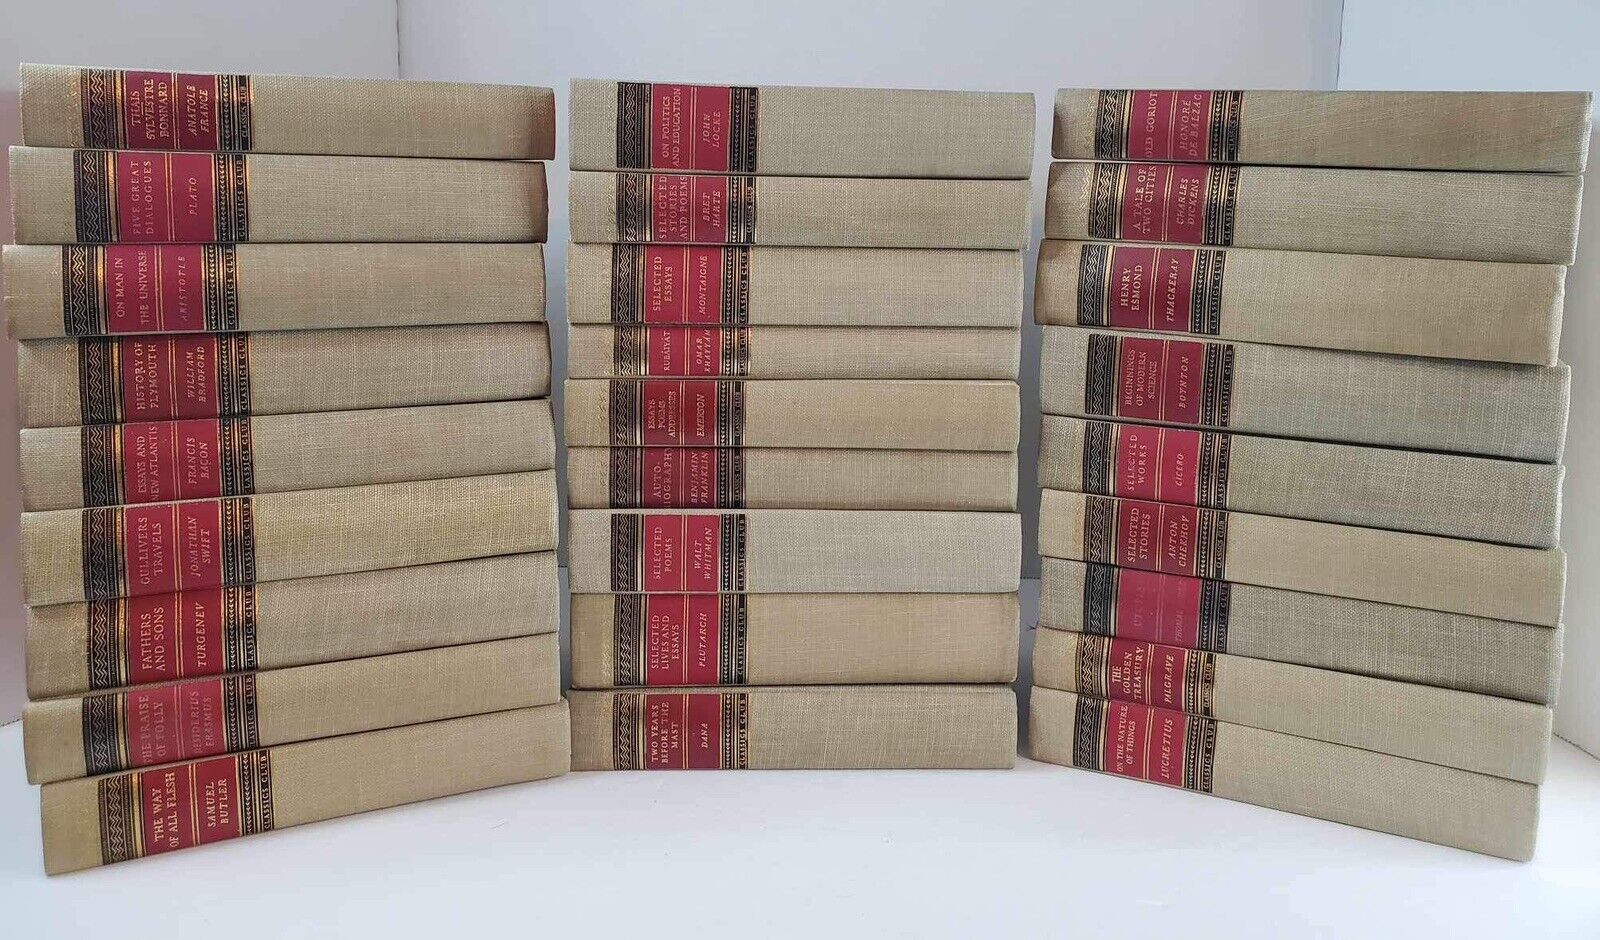 VTG Walter J. Black Classics Club Collection Hardcover Book Lot of 27 -Nice